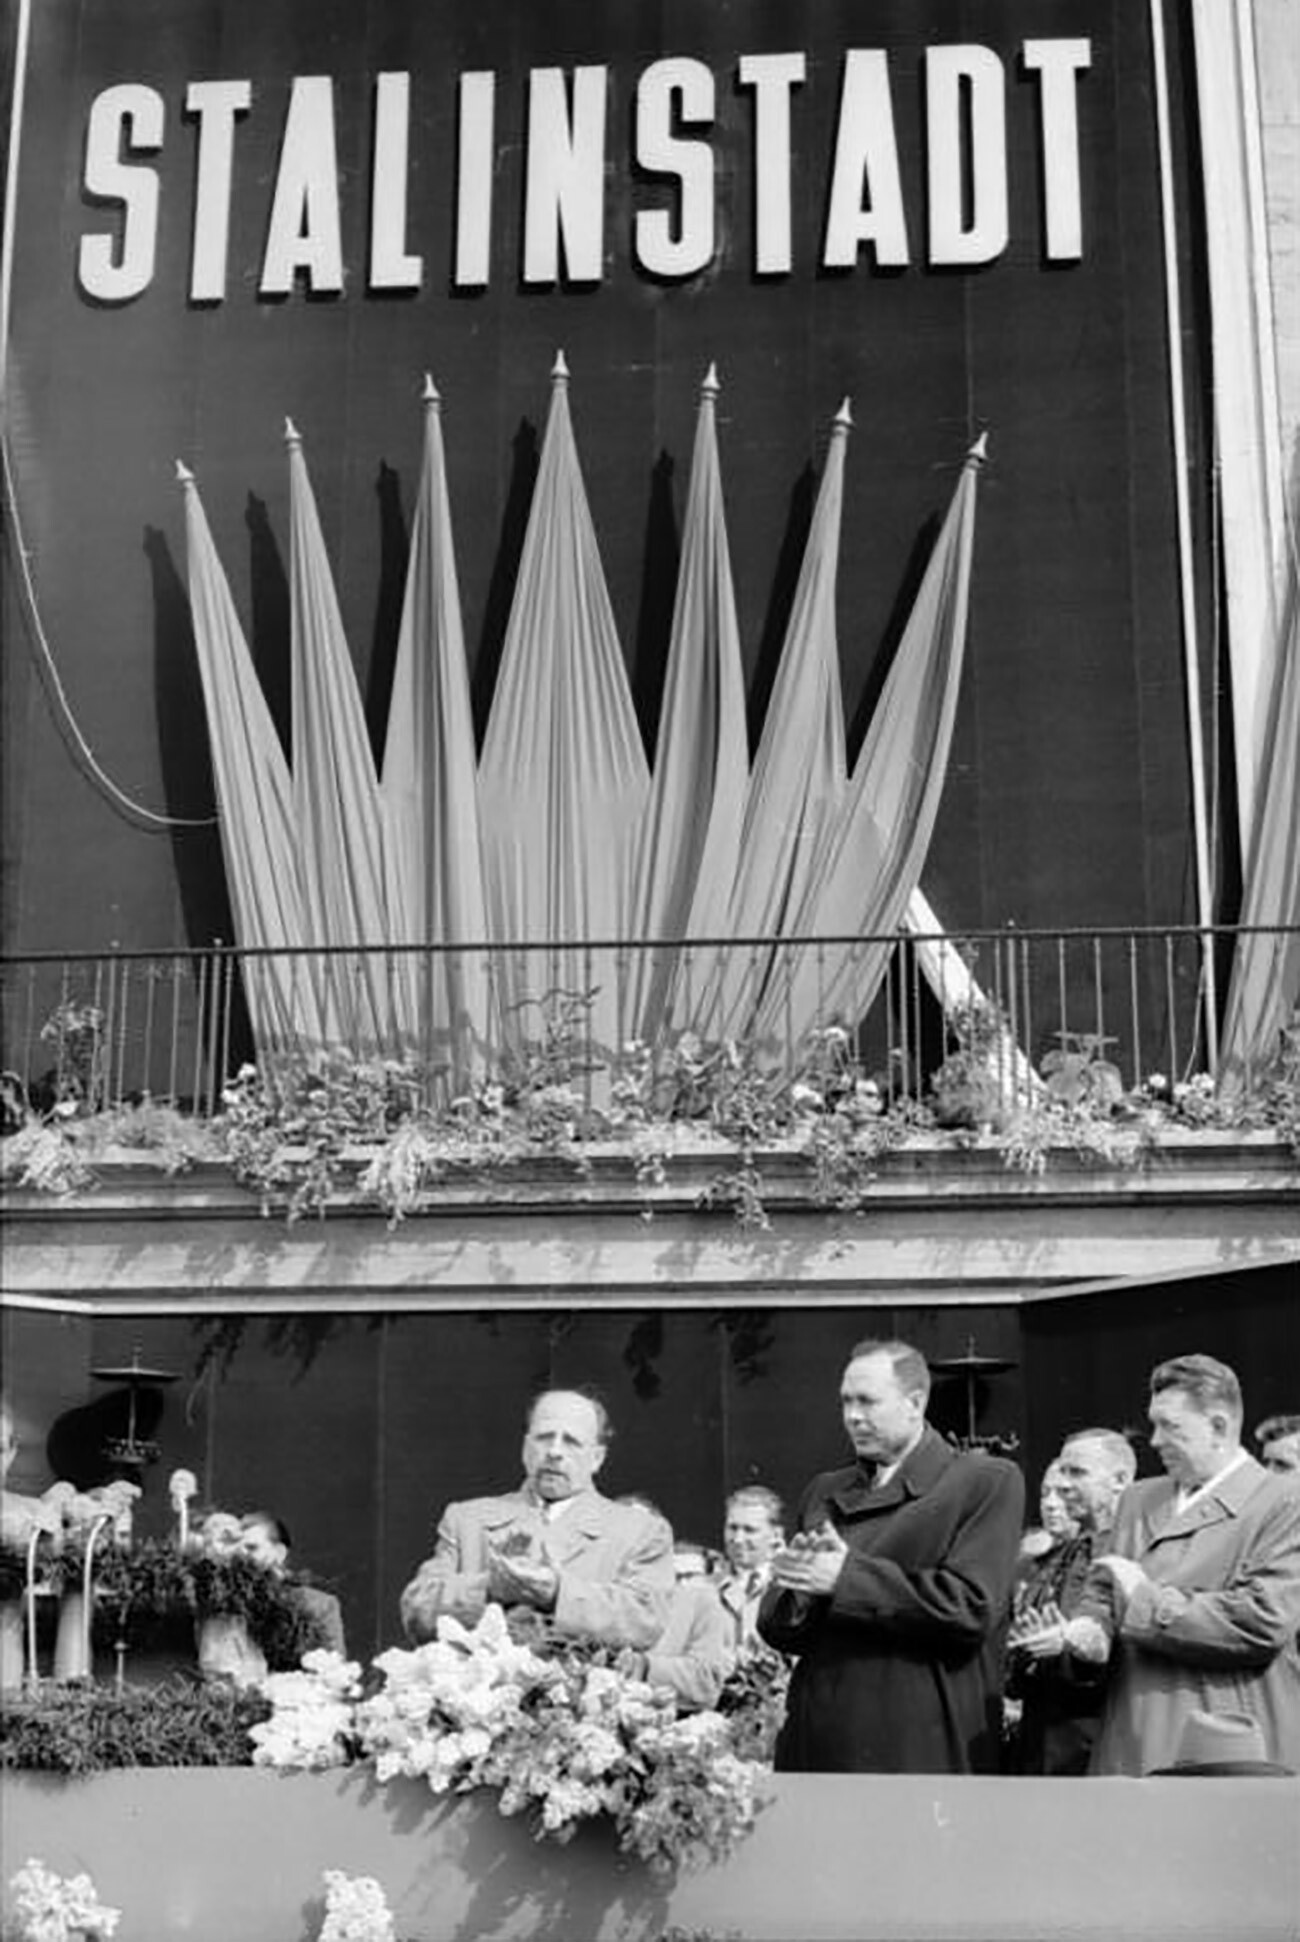 May 7, 1953. The solemn naming of the city after Stalin.